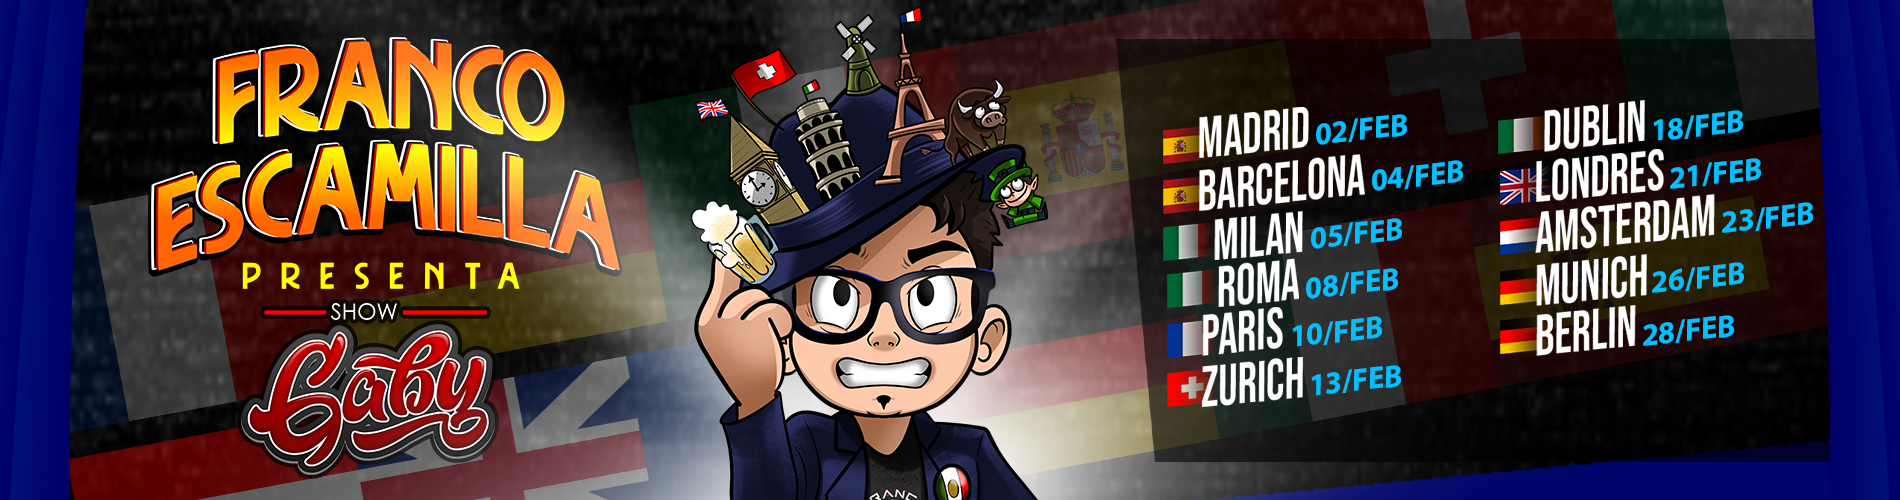 franco-europa-banner-events.png